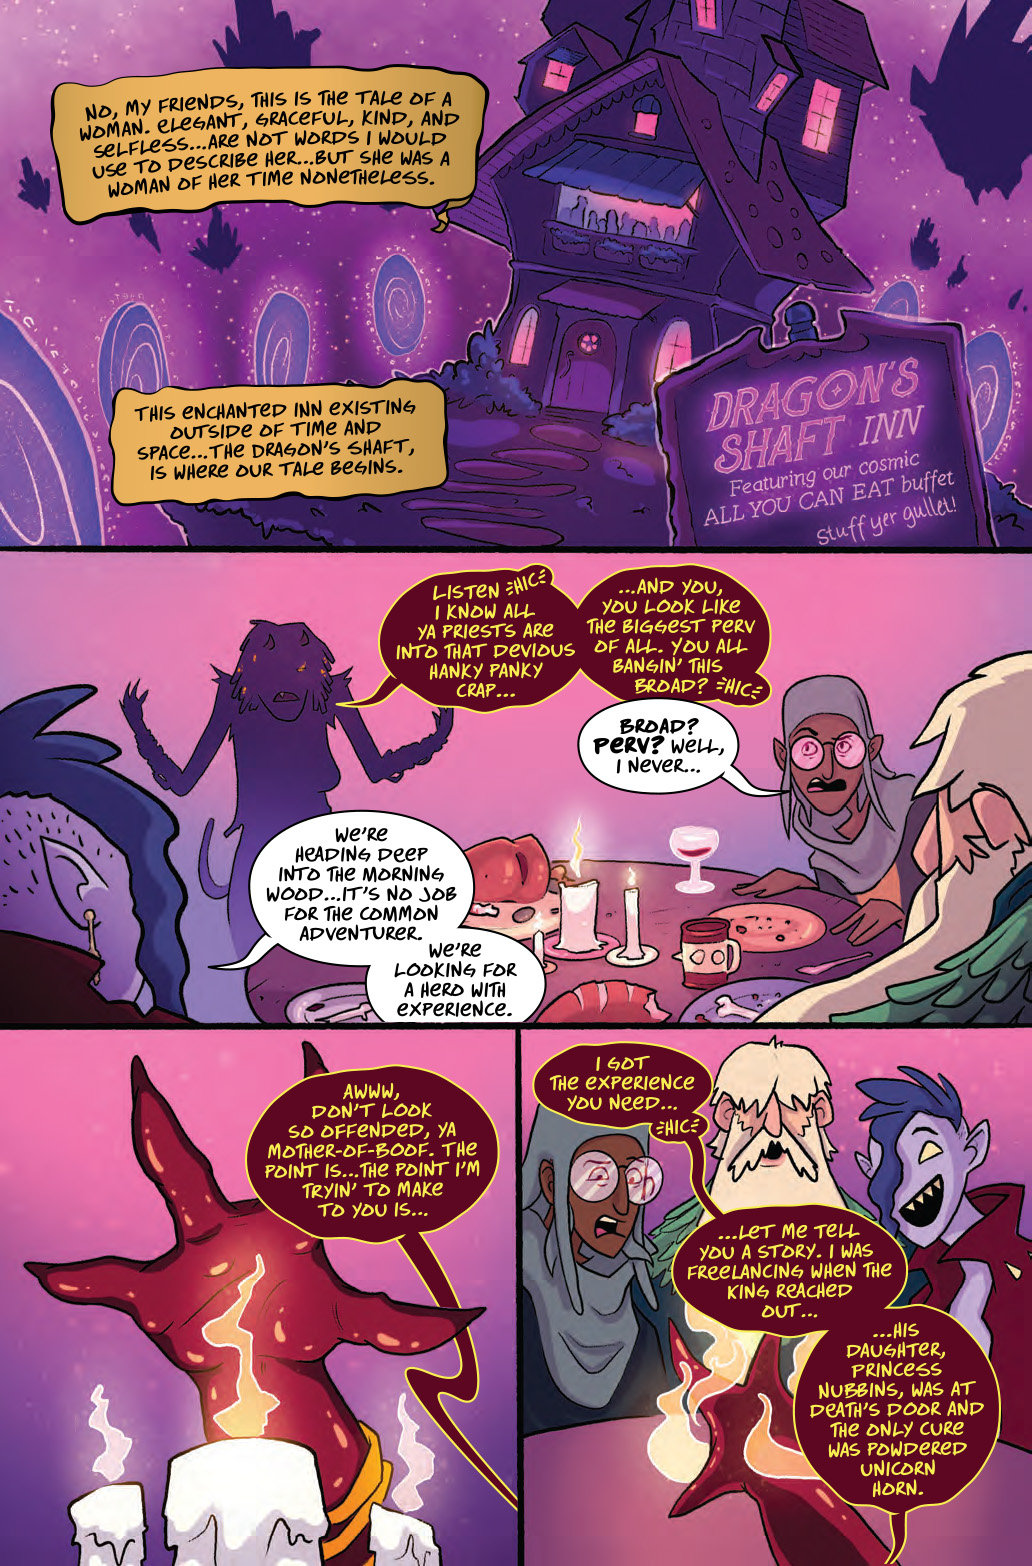 Murder Hobo: All Inn At the Dragon's Shaft (2020): Chapter 1 - Page 5